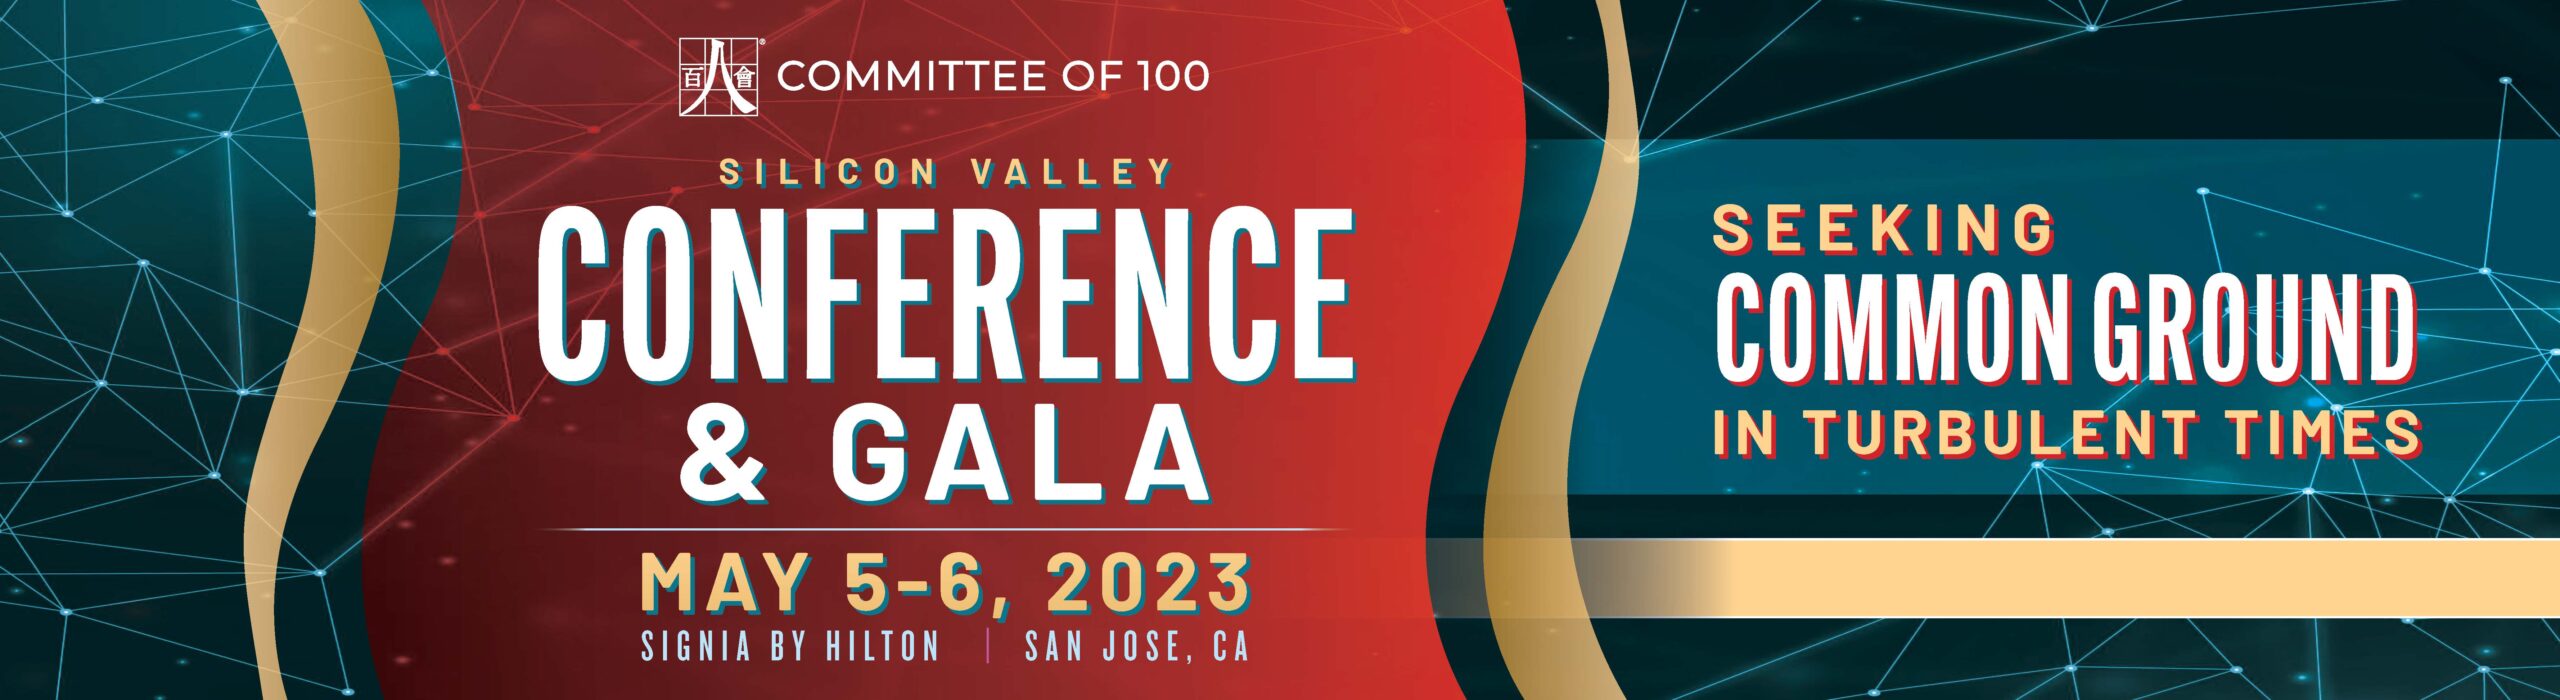 Committee of 100 Releases Updated Schedule and Speakers for 2023 Conference &amp; Gala